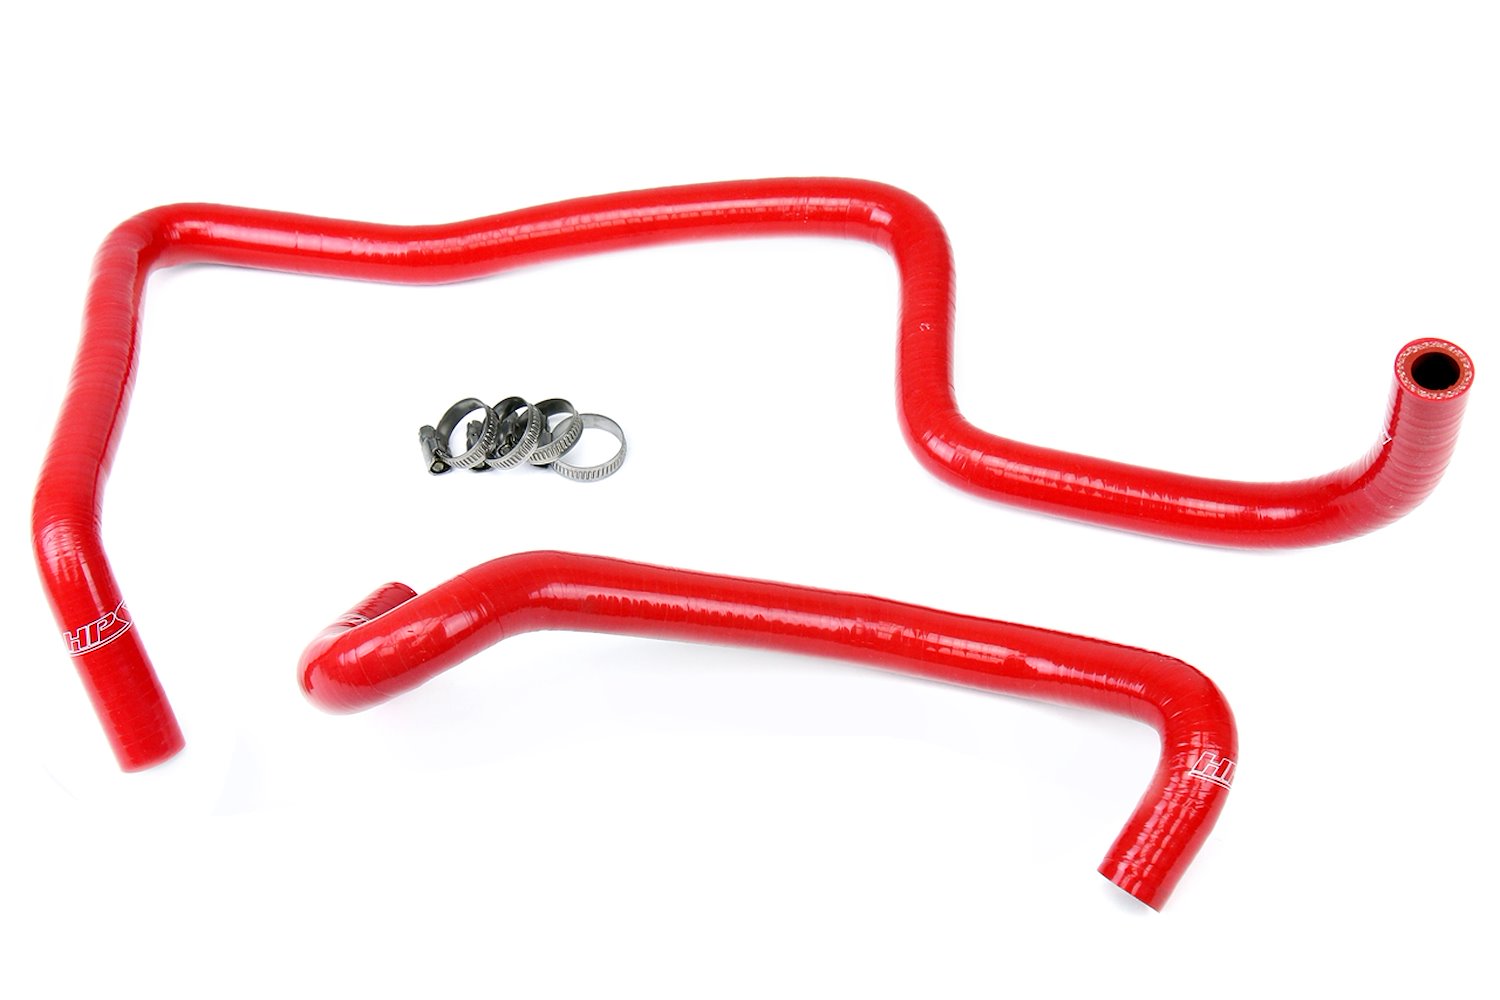 57-1471-RED Heater Hose Kit, High-Temp 3-Ply Reinforced Silicone, Replace OEM Rubber Heater Coolant Hoses